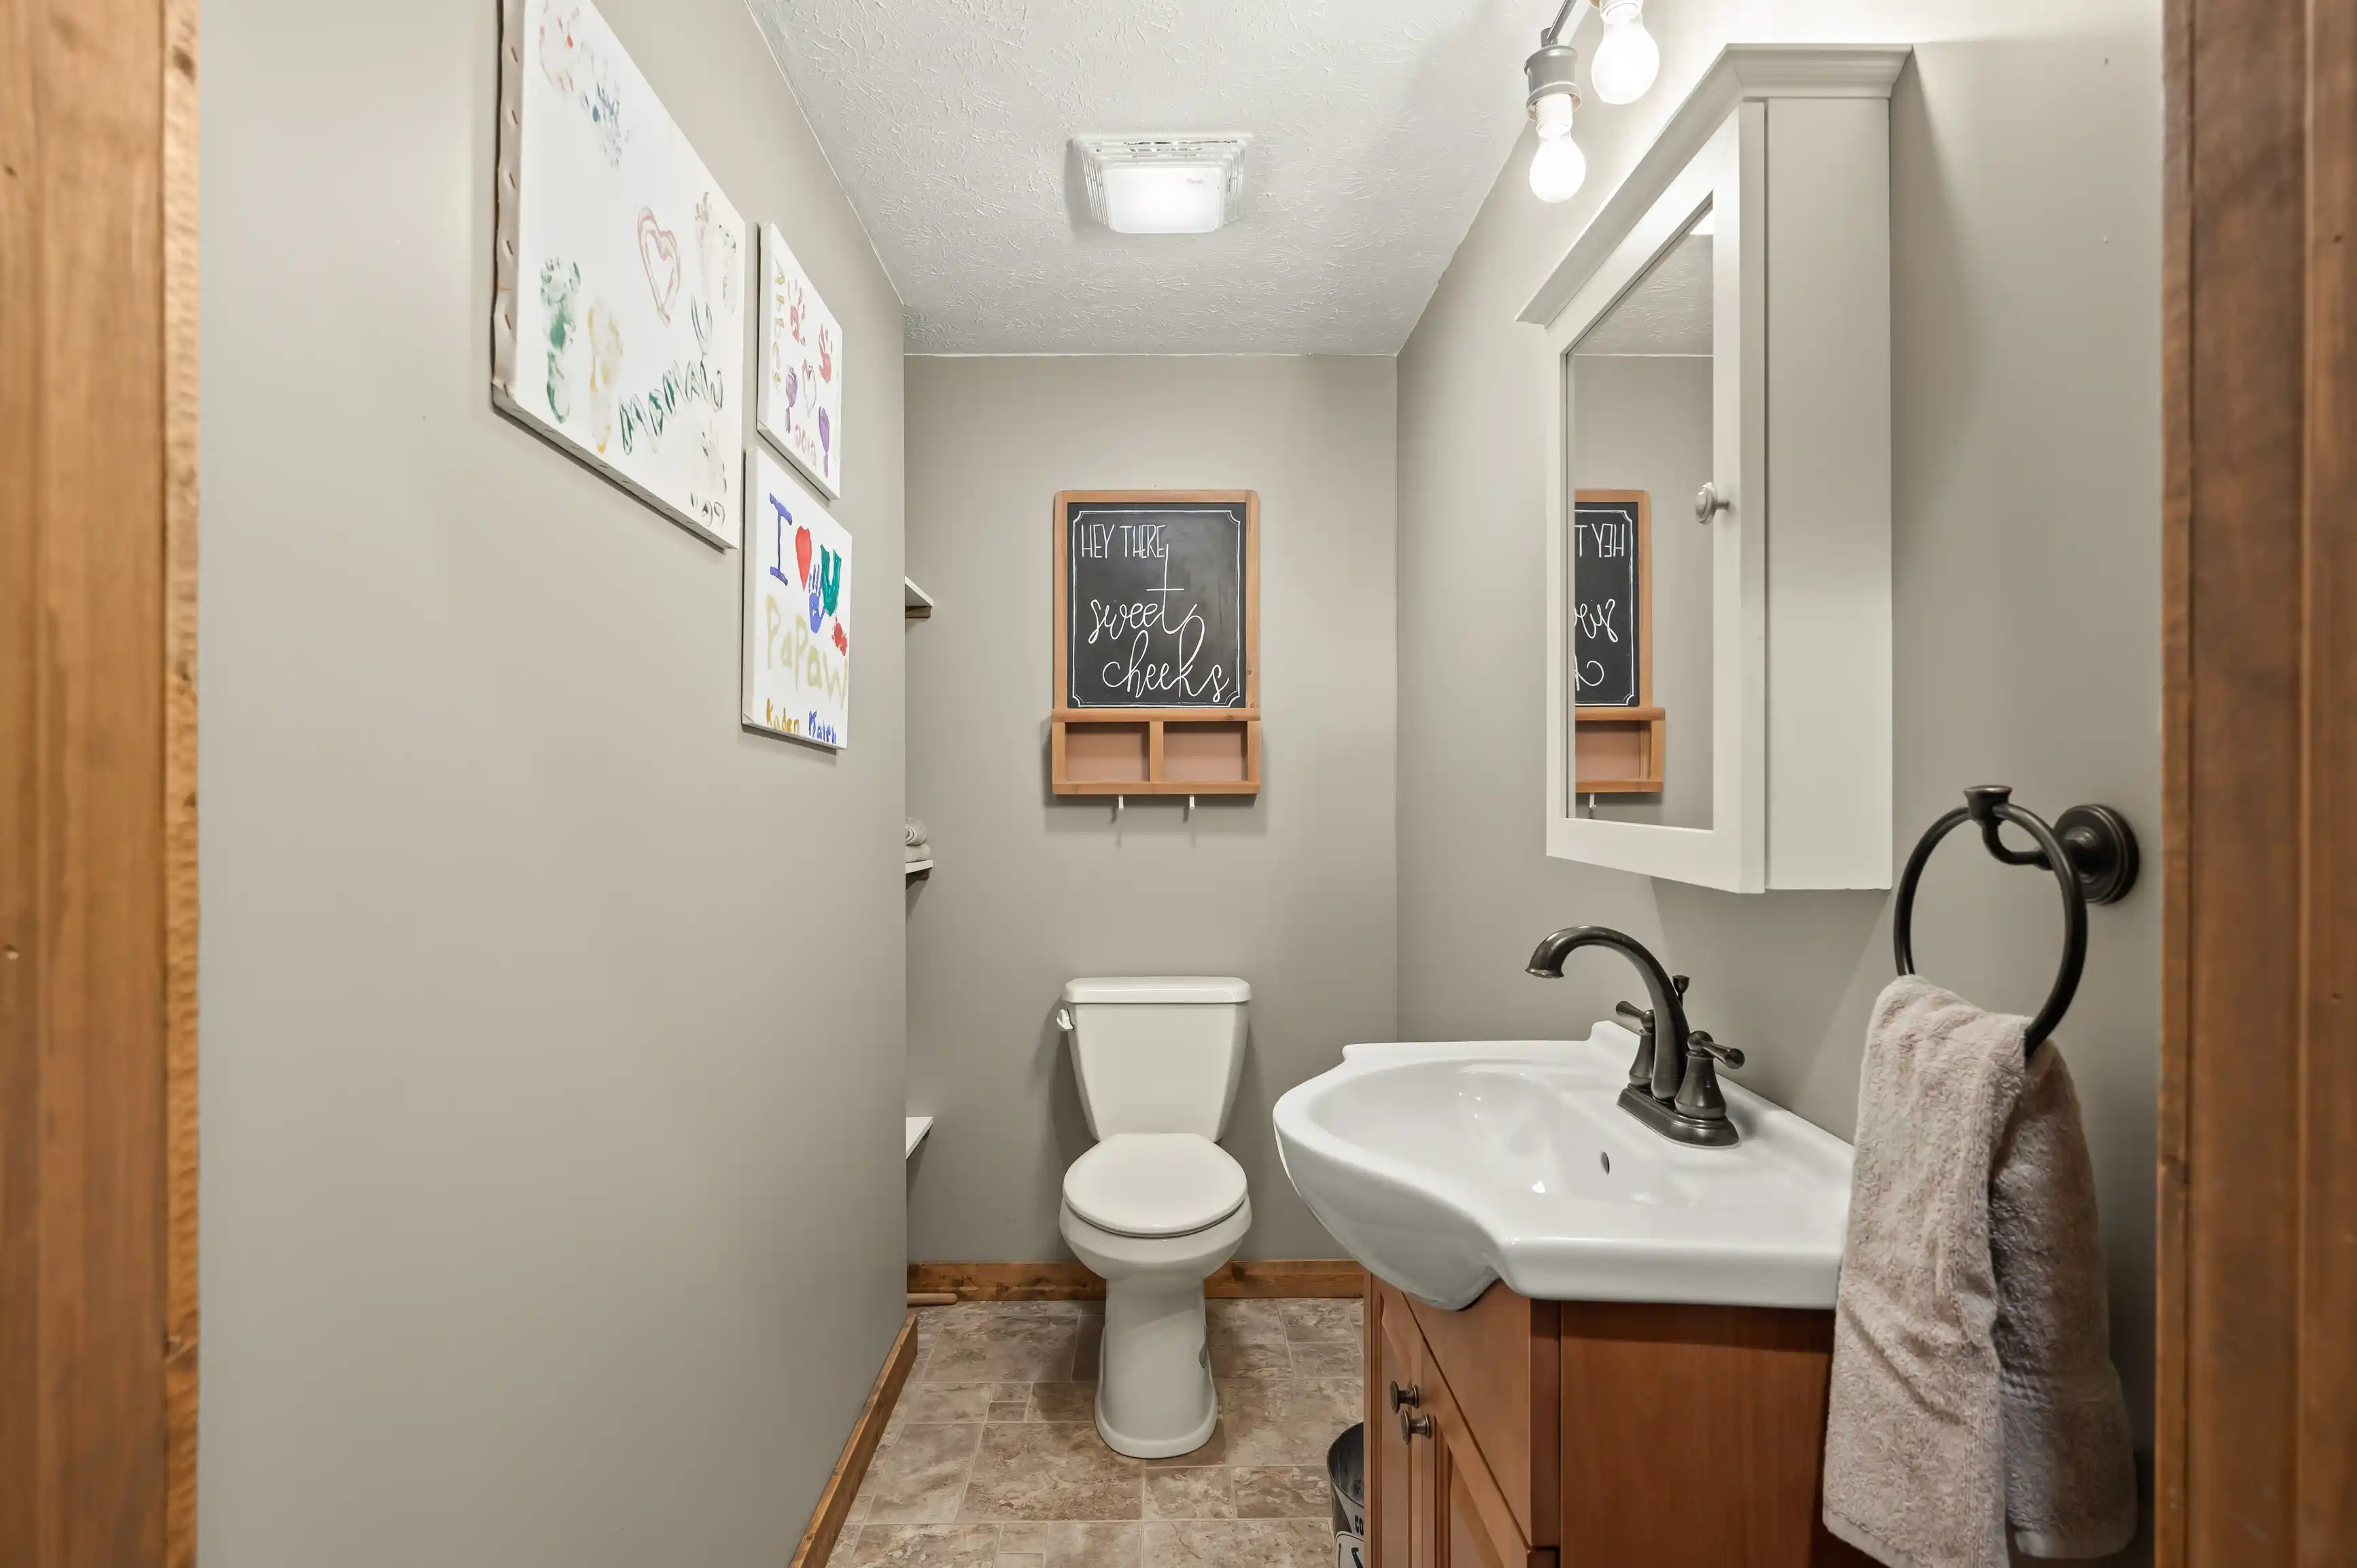 Interior of a cozy bathroom featuring a toilet, a sink with a wooden vanity, a mirror with reflections of a decorative chalkboard, and children's artwork on the wall.